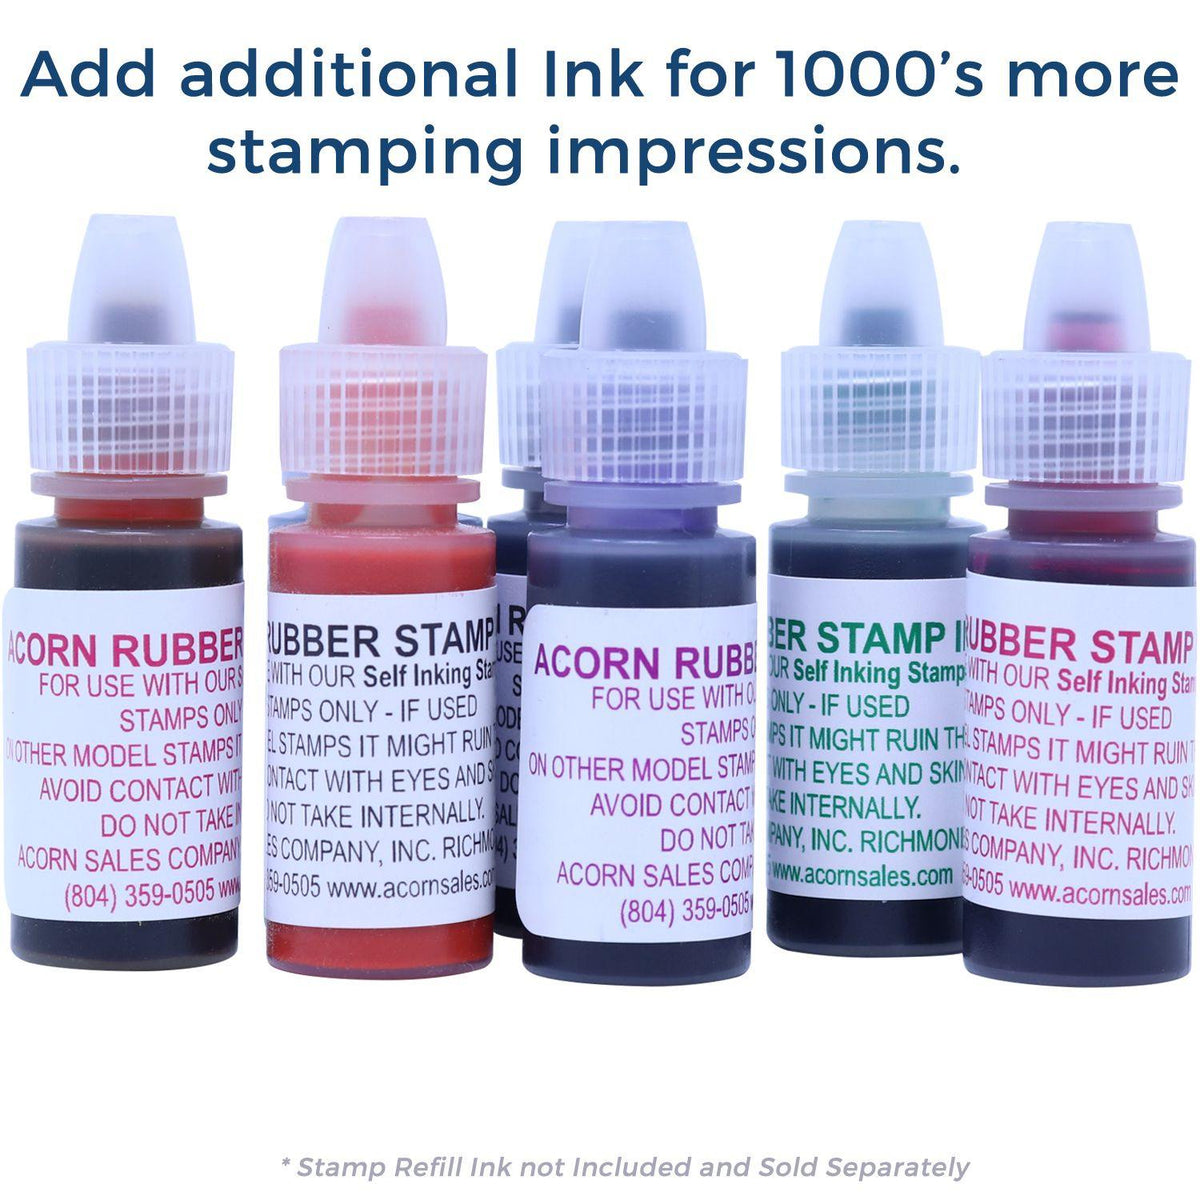 Refill Inks for Slim Pre-Inked Cursive Draft Stamp Available